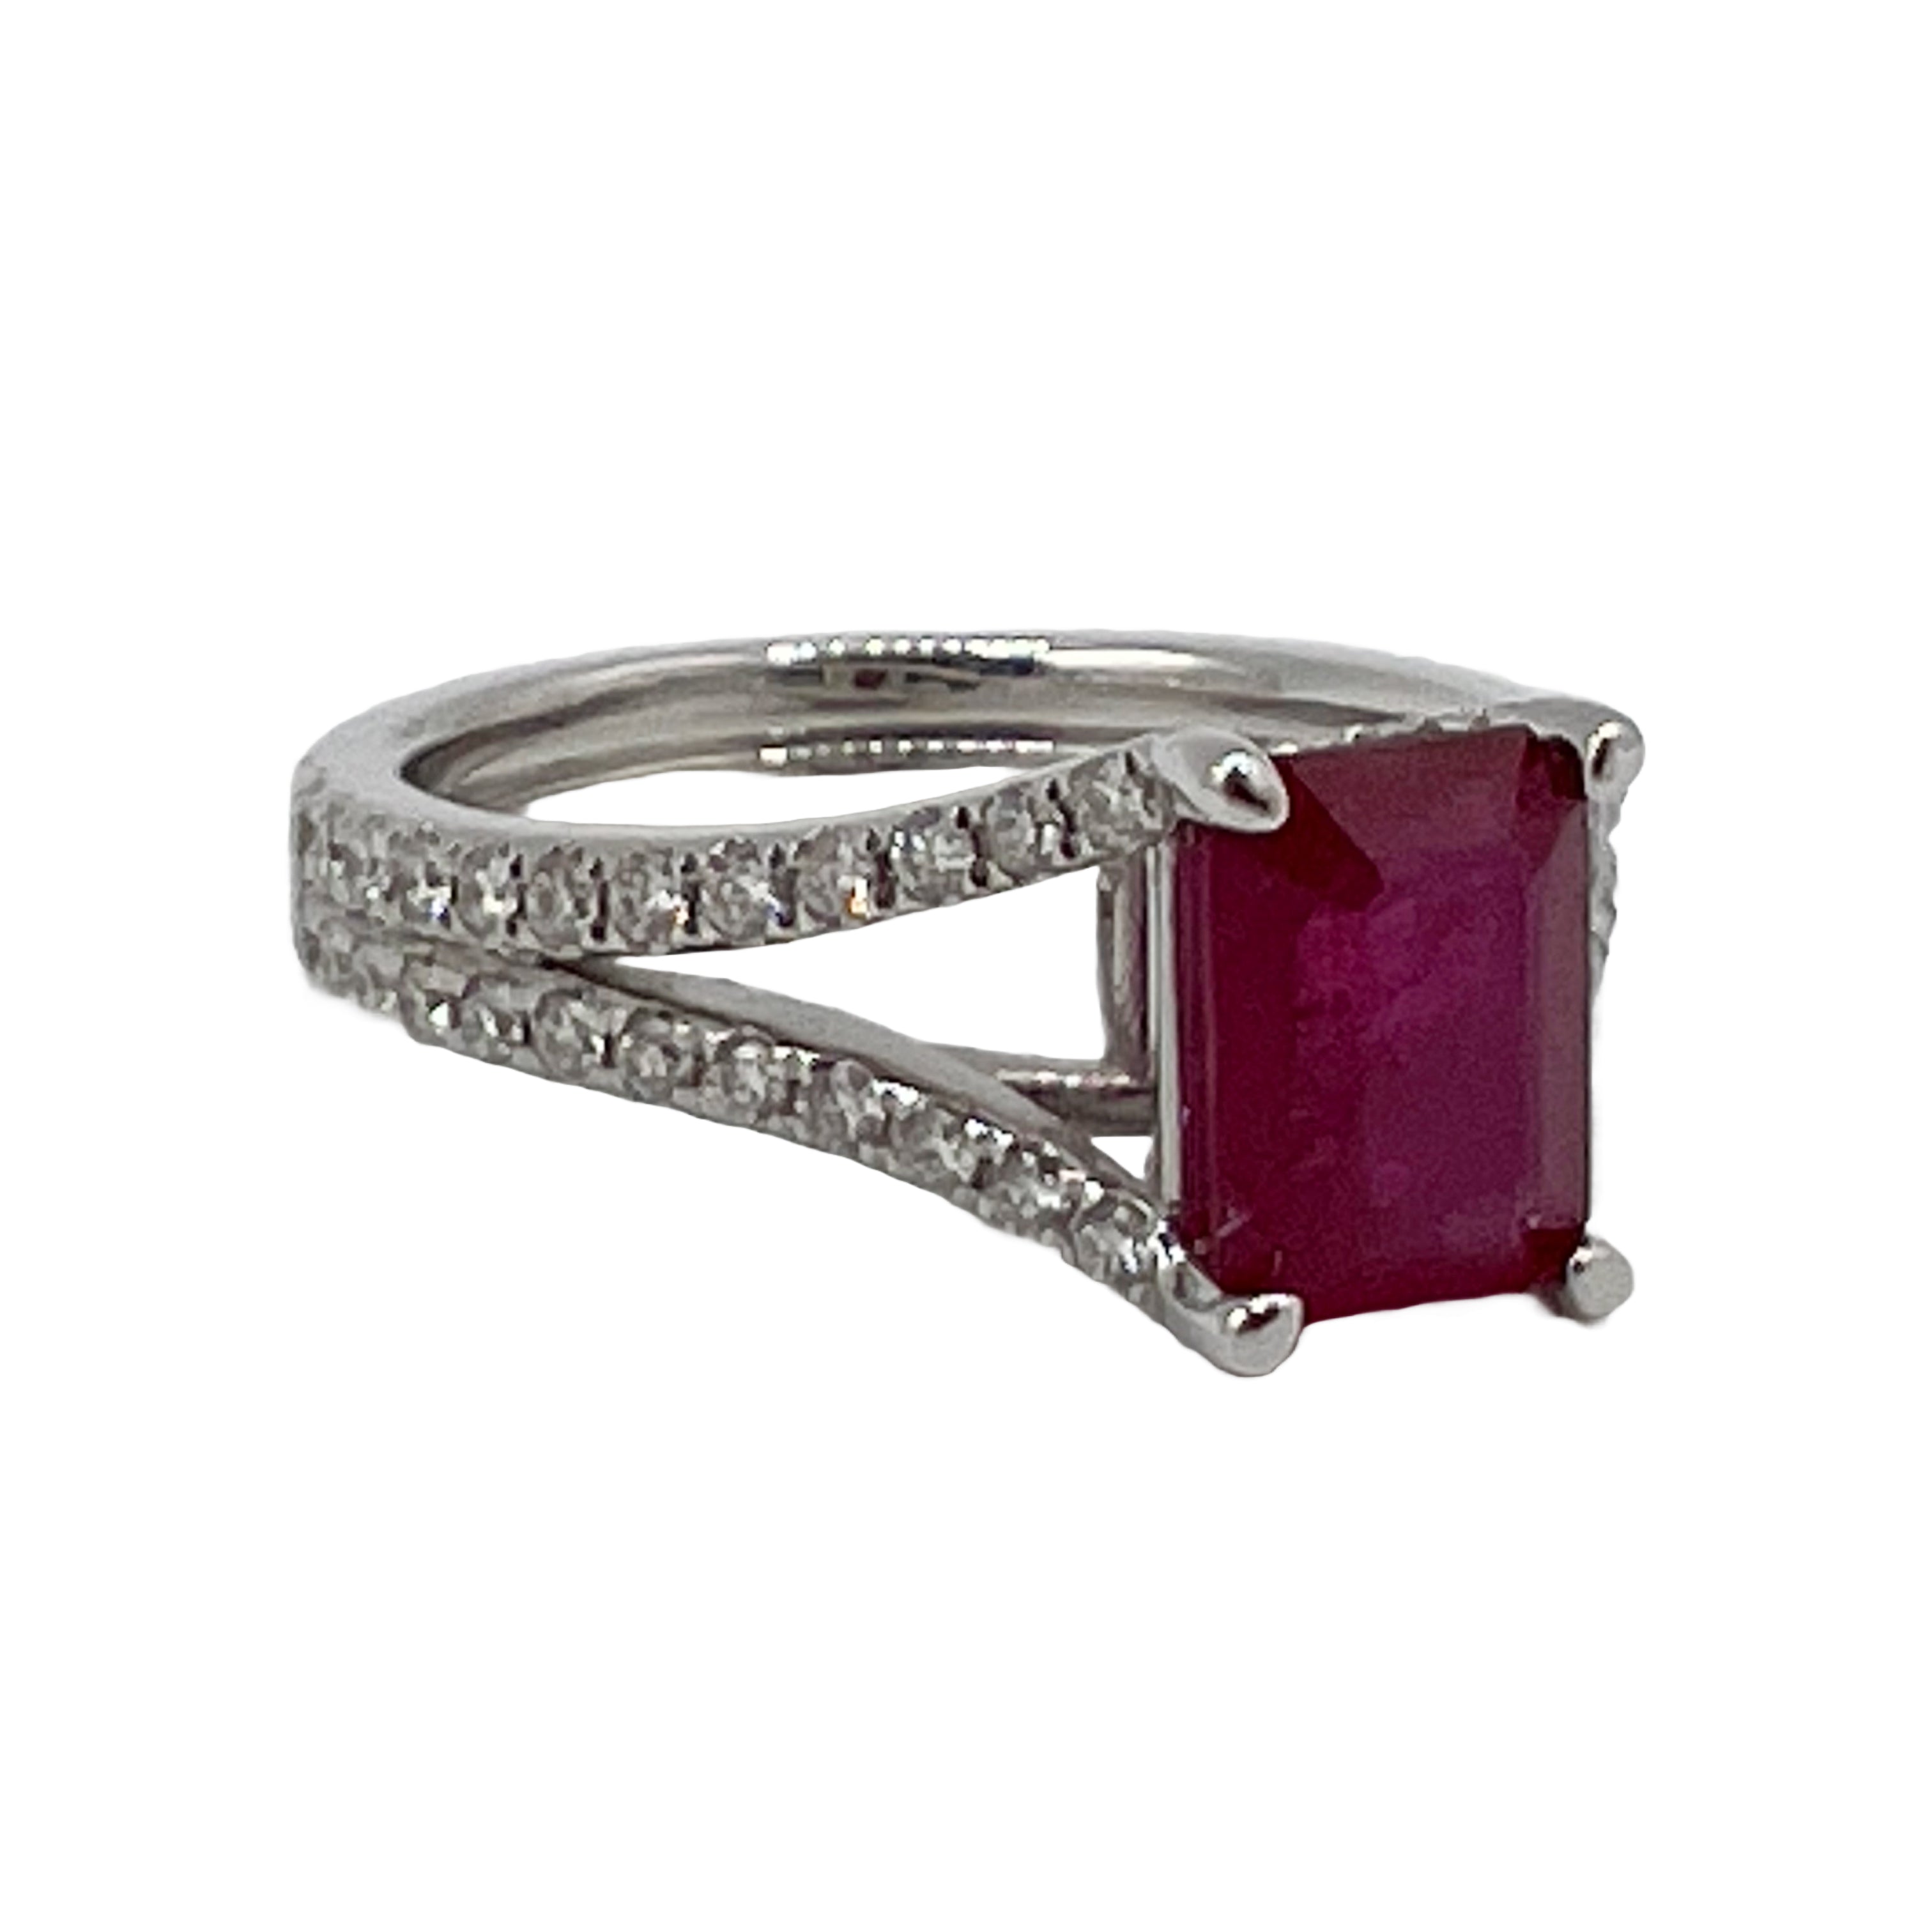 Ring 18KW/5.4G 1RUBY-1.89CT 66RD-0.49CT